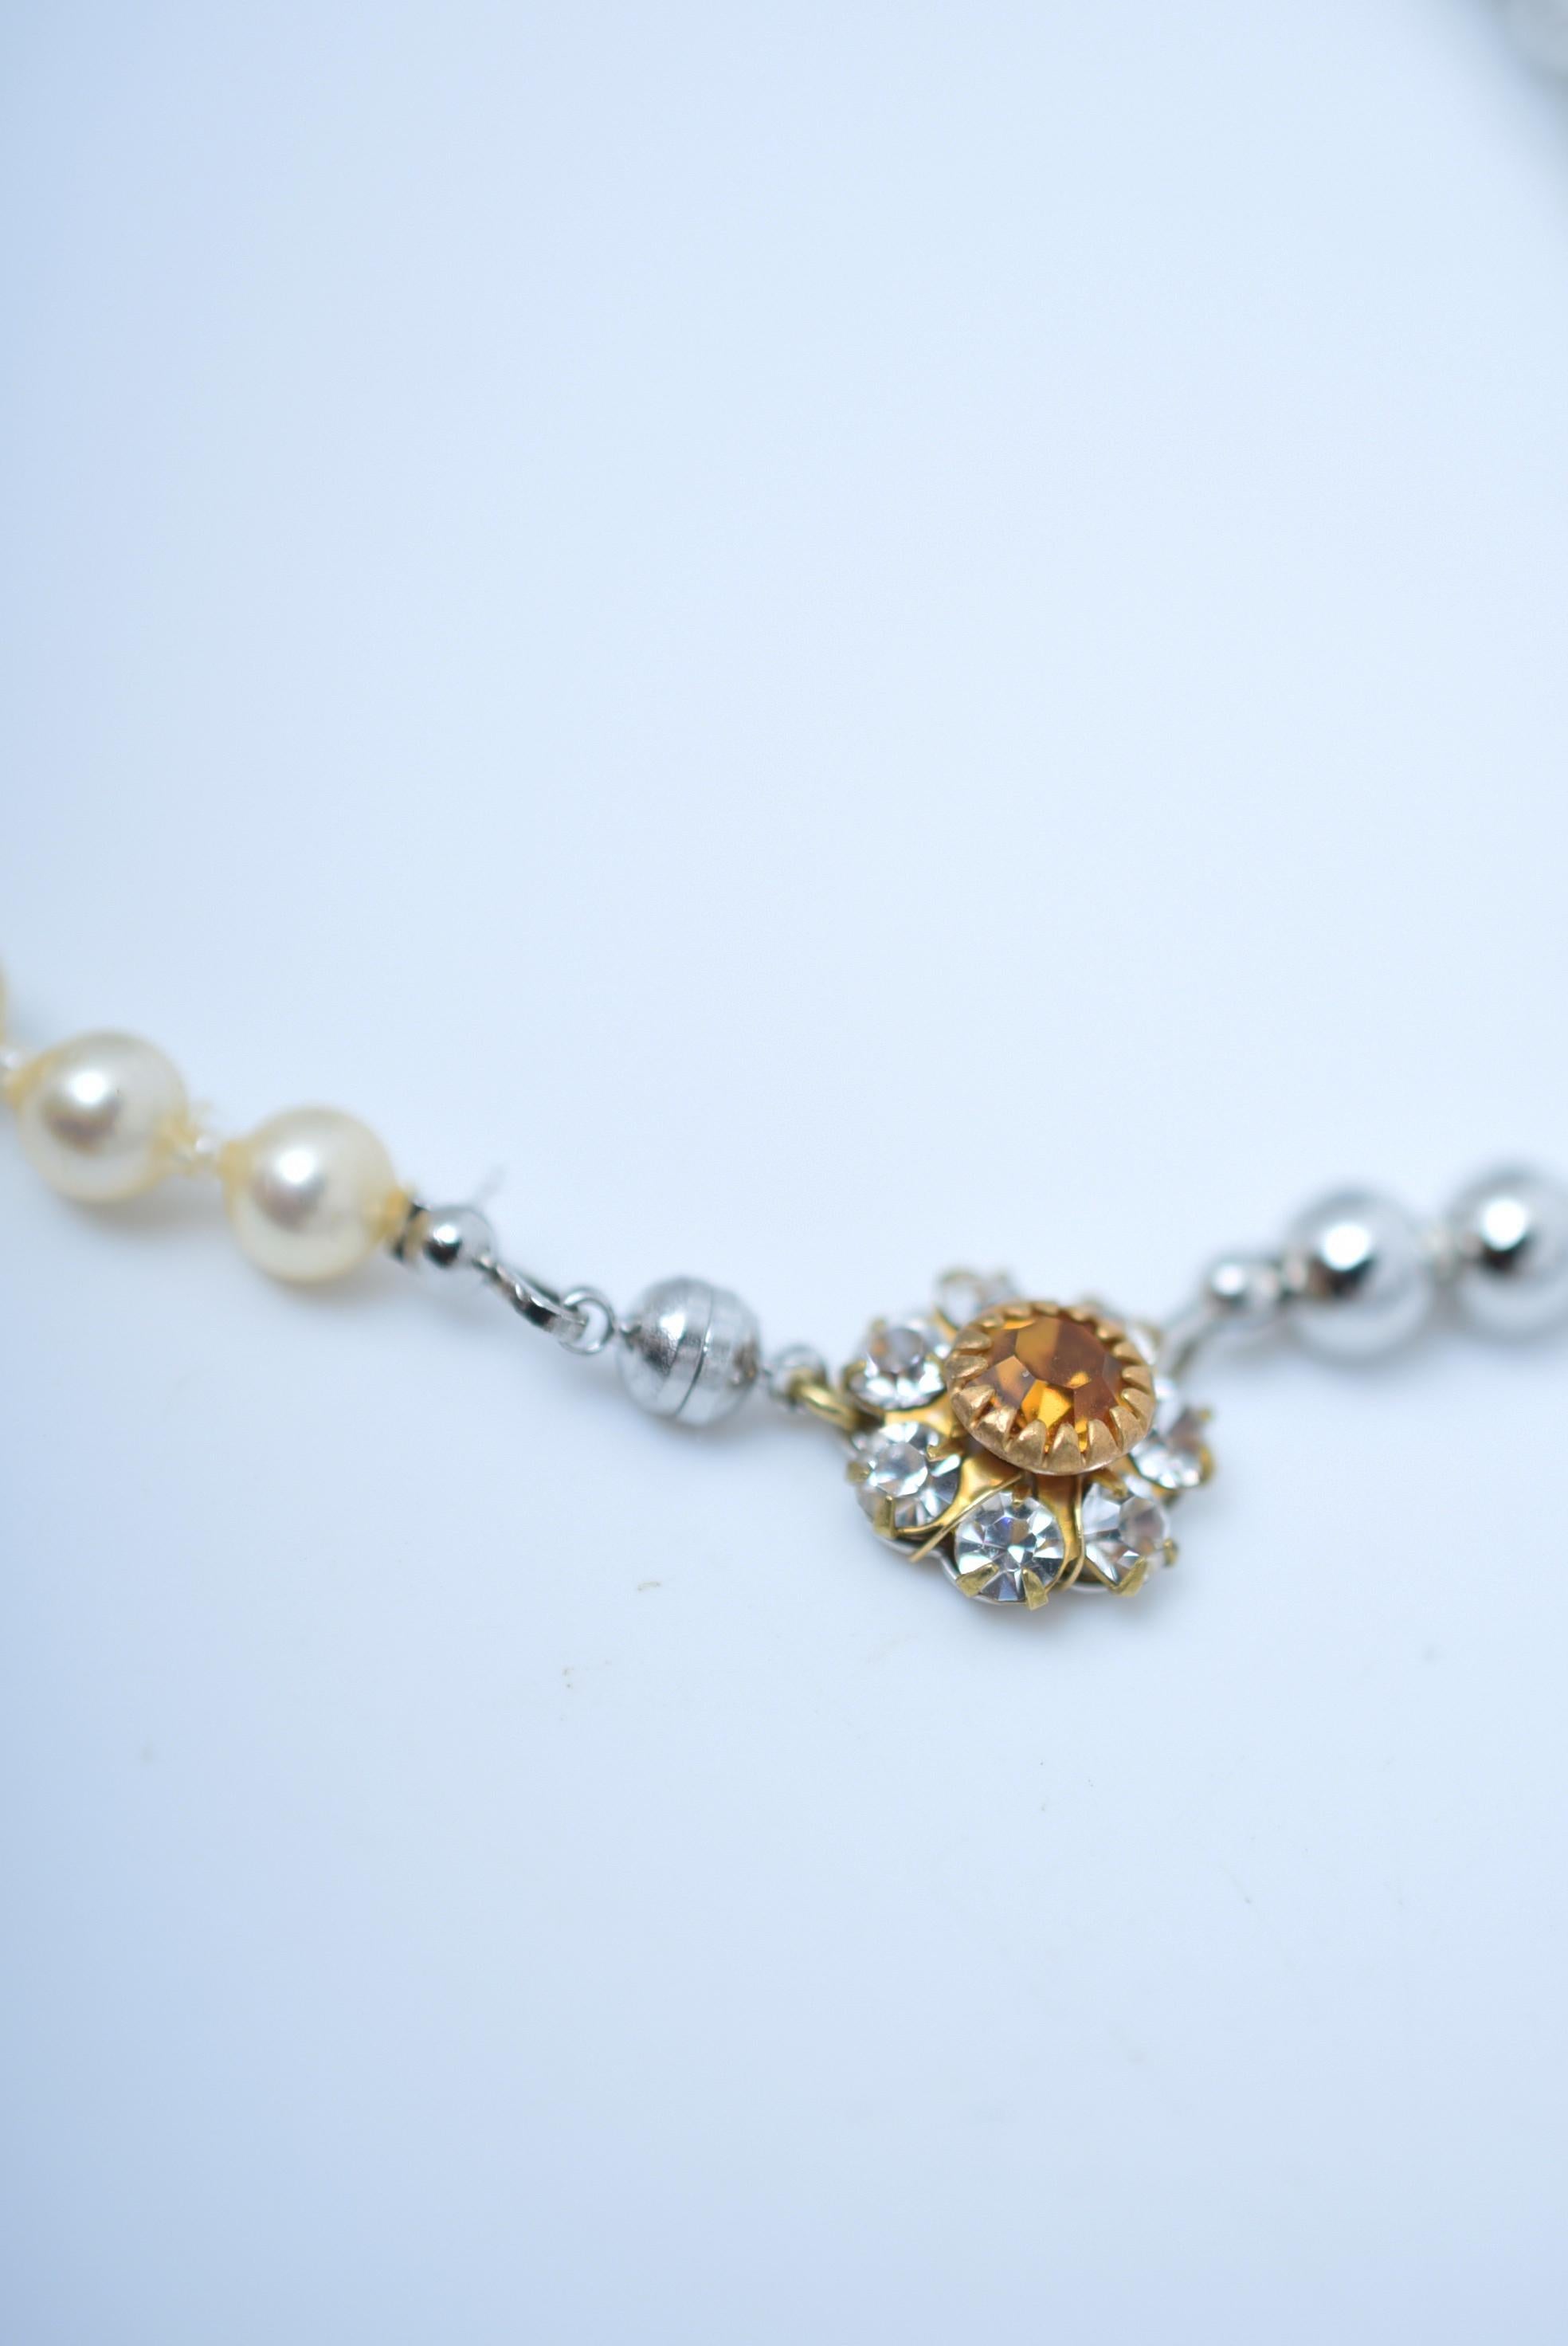 material:Brass, Vintage 1970s Japanese glass pearl,magnet,rhodium coating
size:length 41.5cm


The expression of this necklace changes depending on the position of the motifs.
Please try wearing it in different positions of the flowers.
Please enjoy